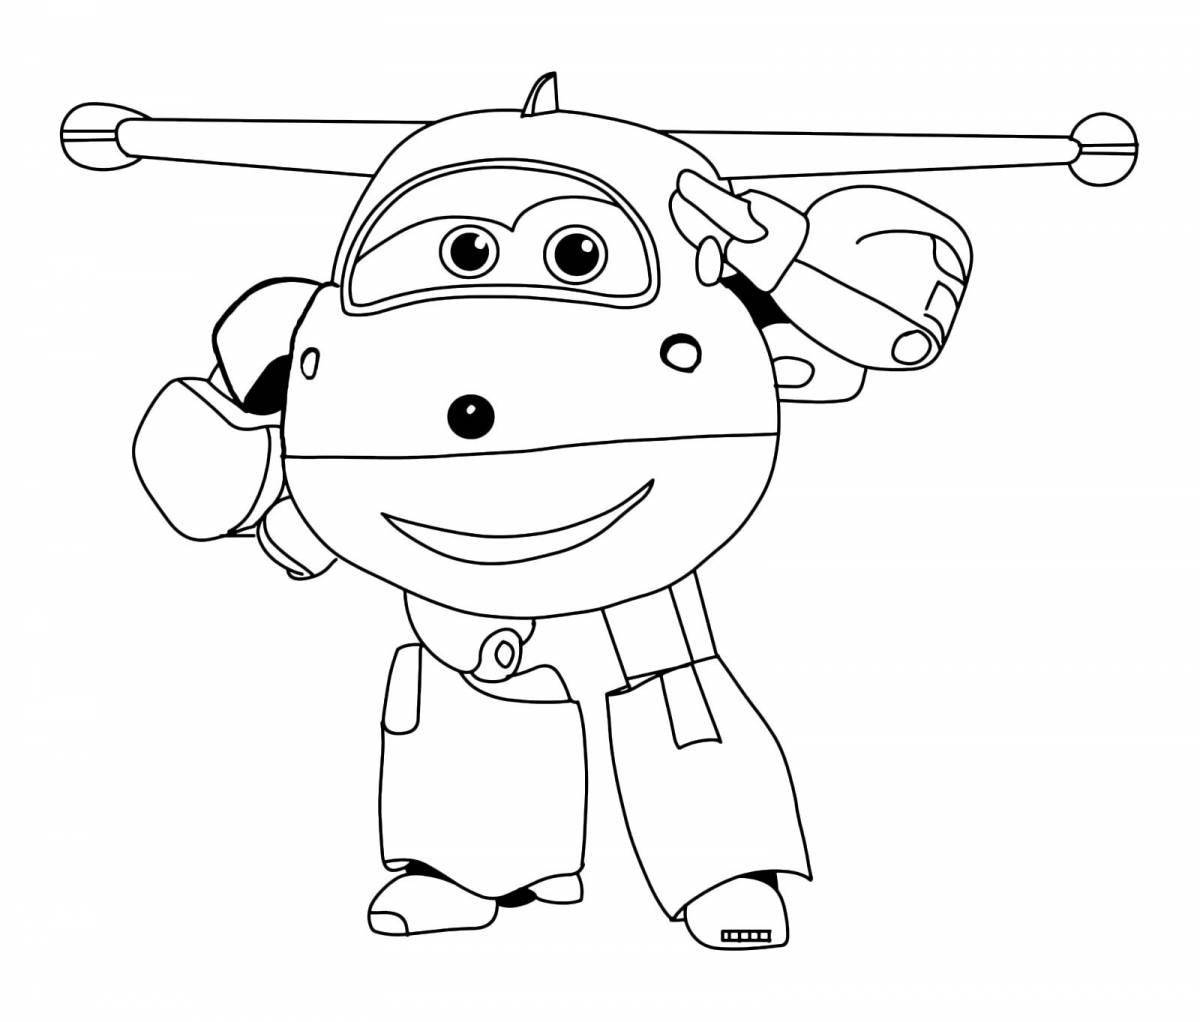 Cute cartoon character coloring book for 3-4 year olds